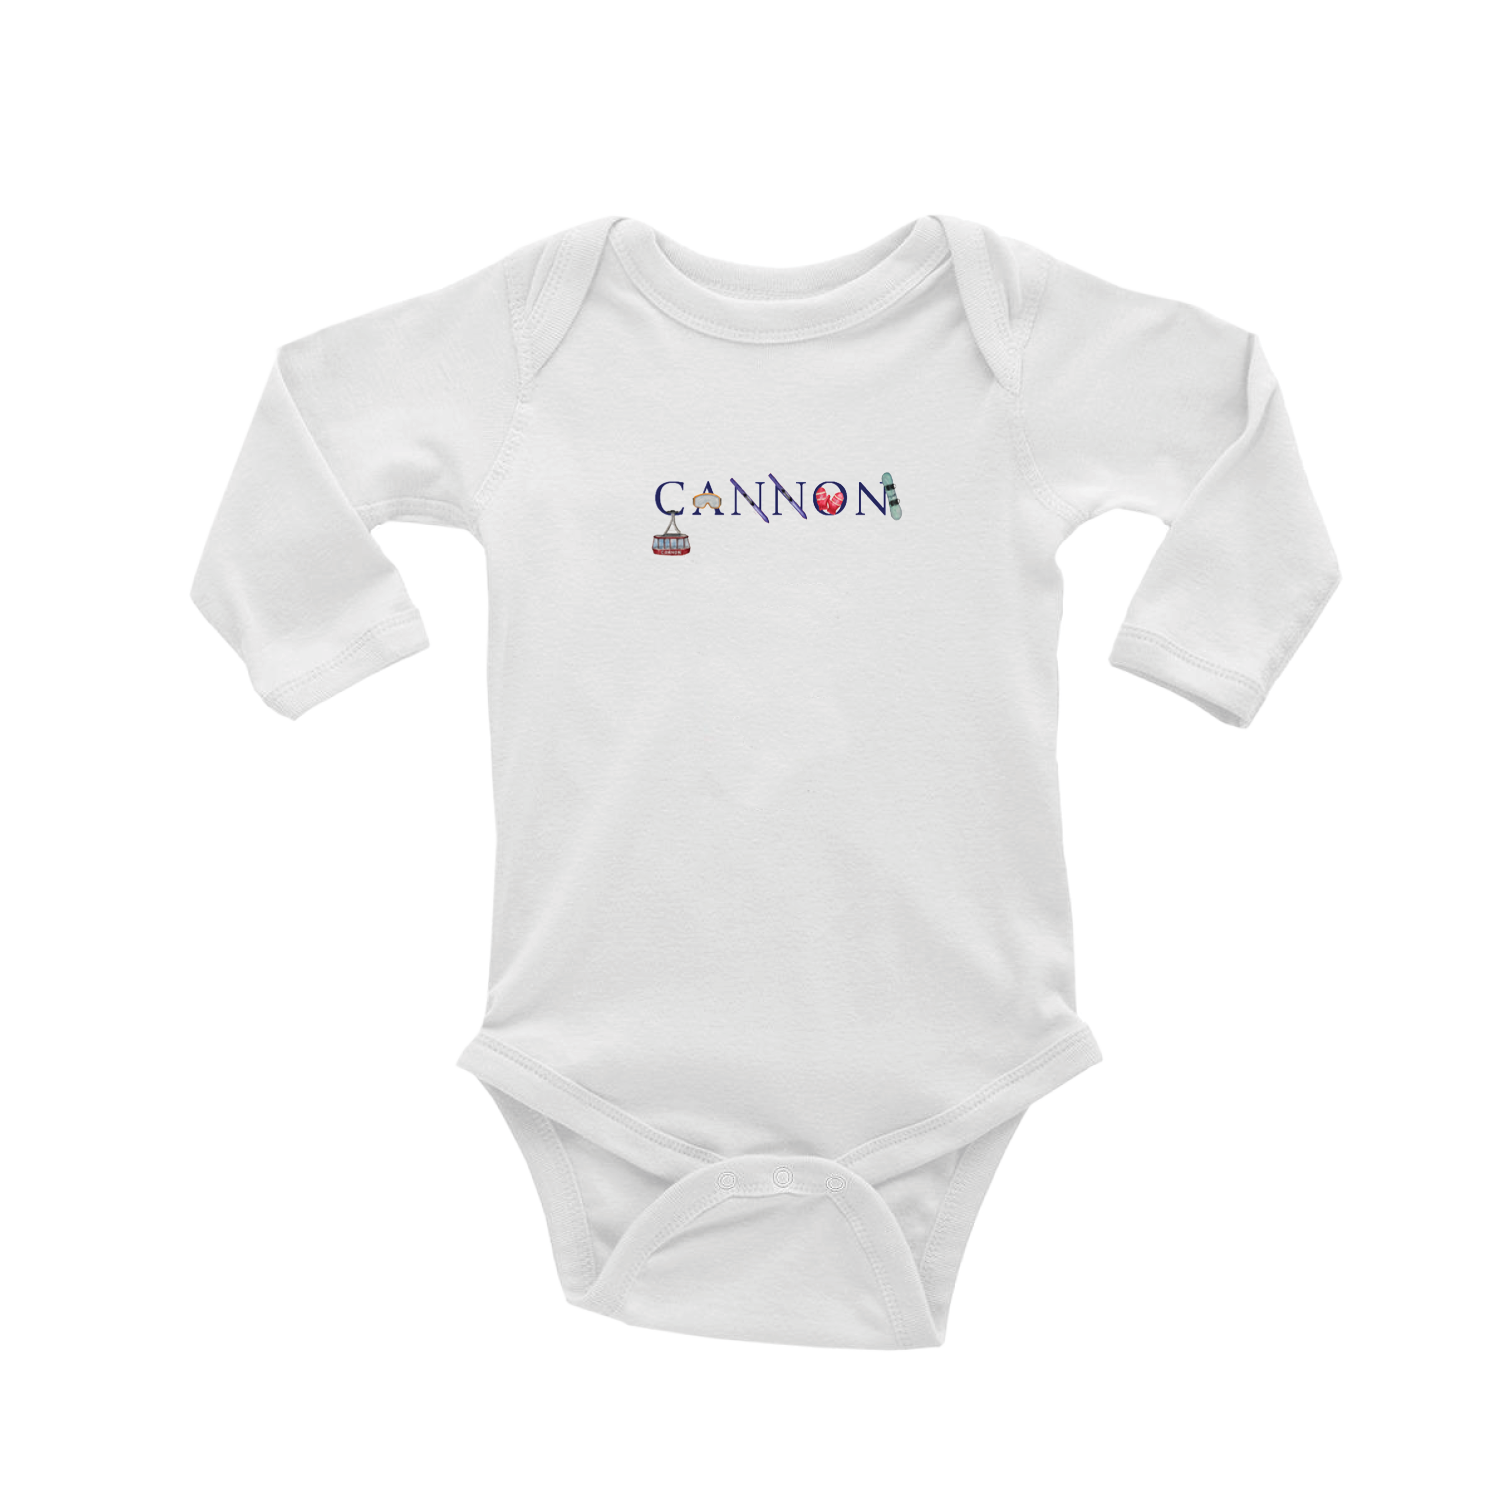 cannon baby snap up long sleeve